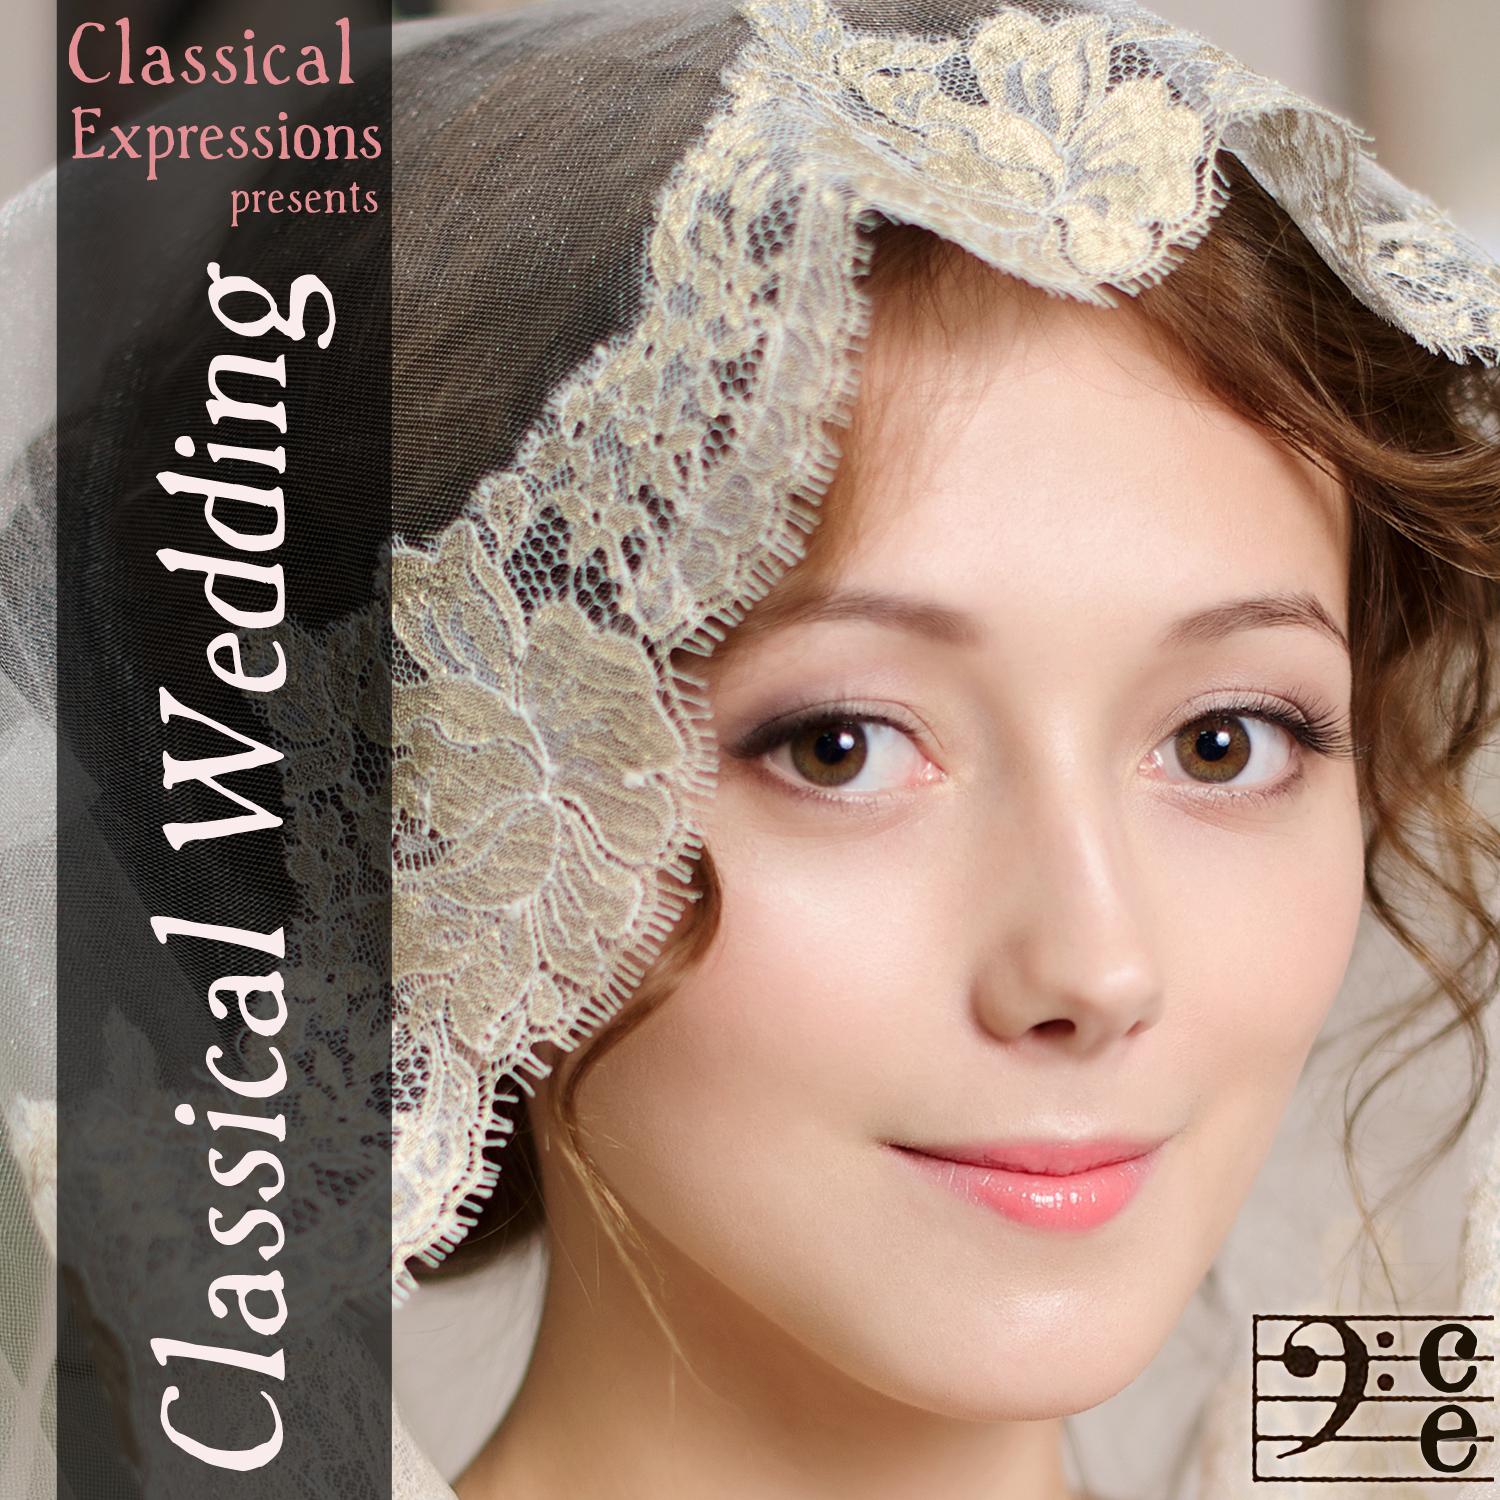 Classical Wedding: 30 Essential Songs for Your Wedding Ceremony or Reception